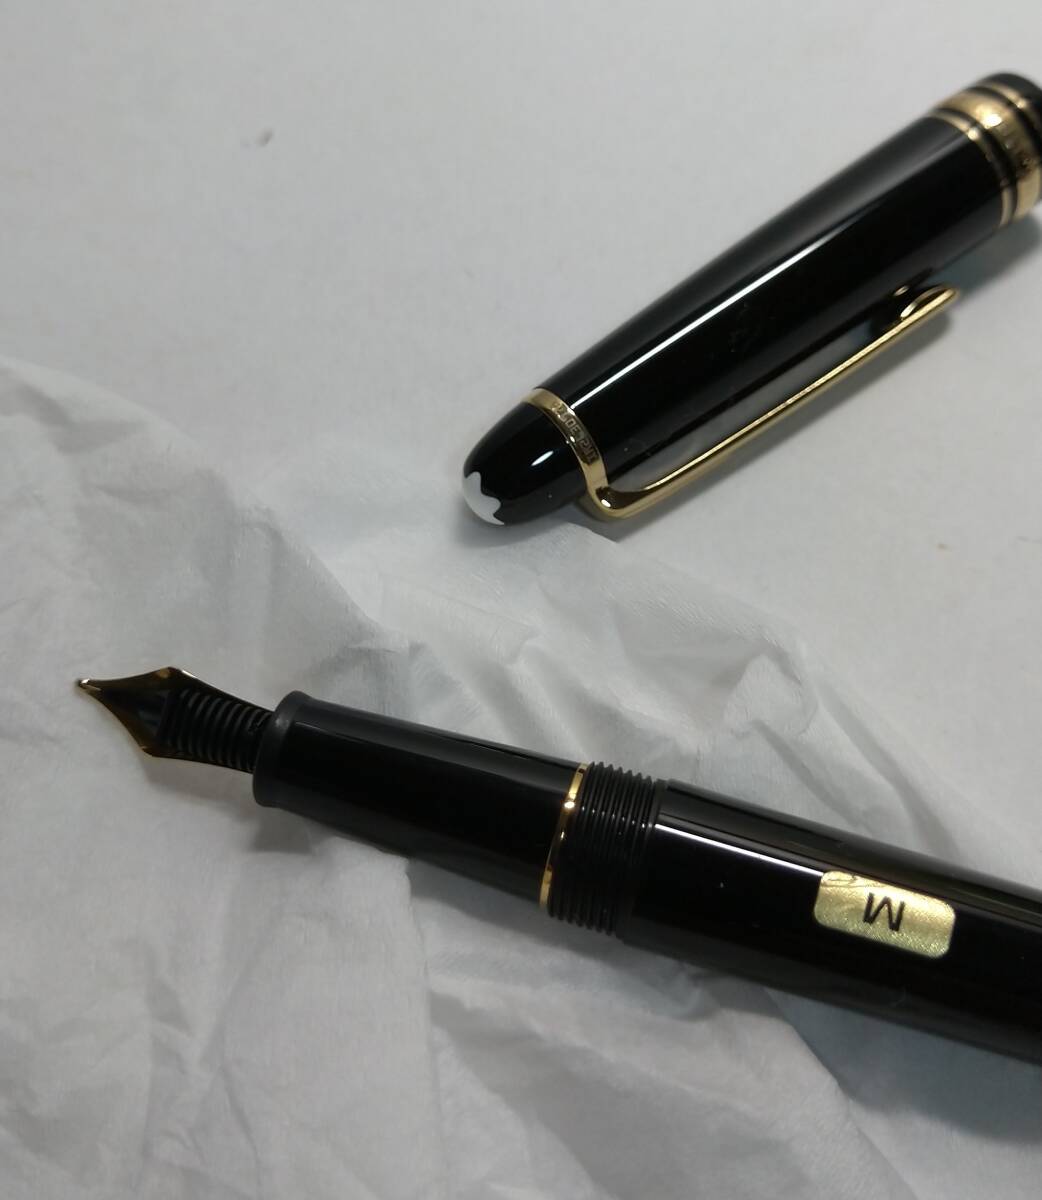 1 jpy start unused goods Montblanc my shuta-shutik fountain pen Gold coating Classic pen .M middle character Germany made 